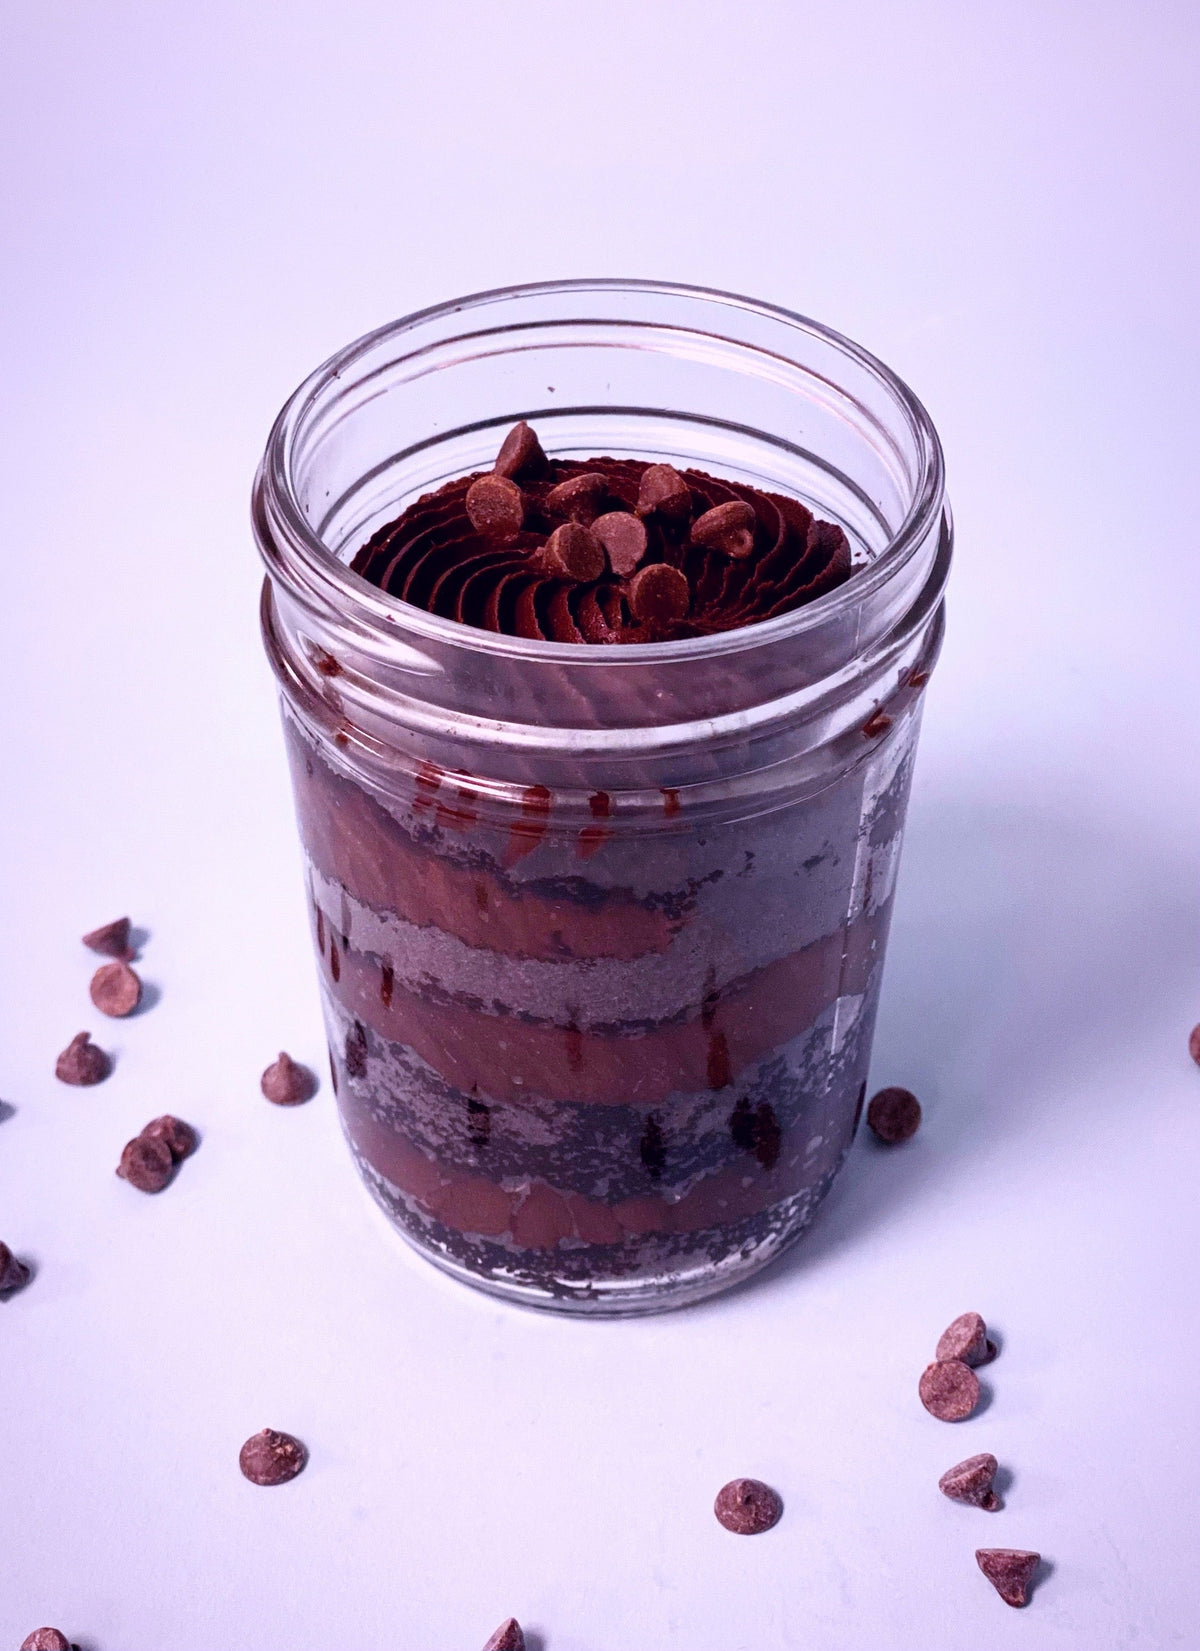 Double Trouble Cake in a Jar